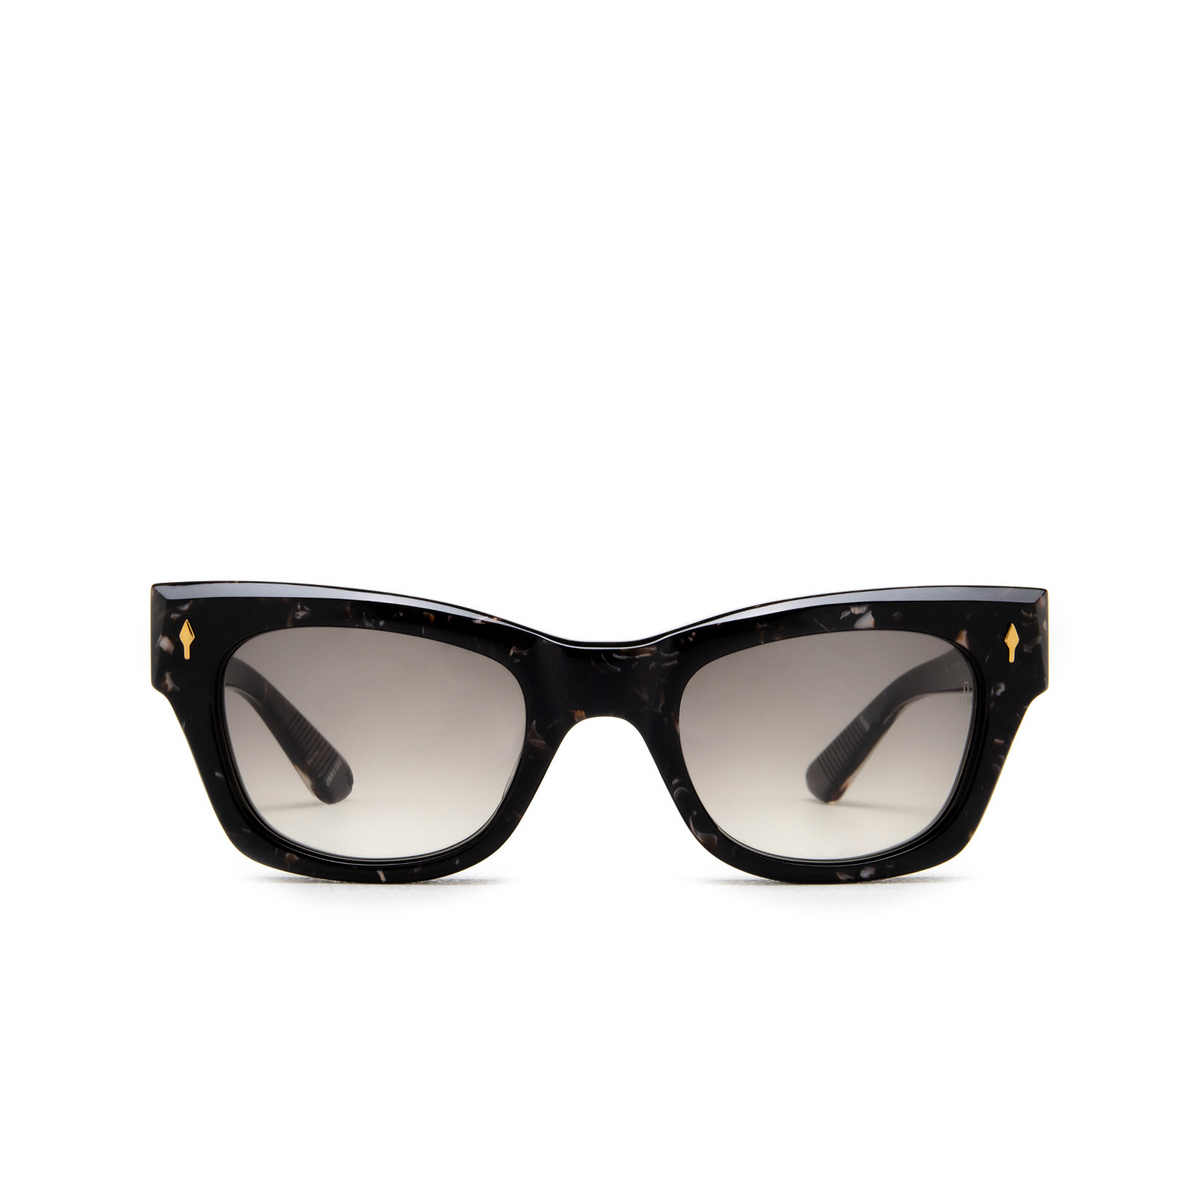 Jacques Marie Mage ALL THESE NIGHTS Sunglasses GRANITE - front view